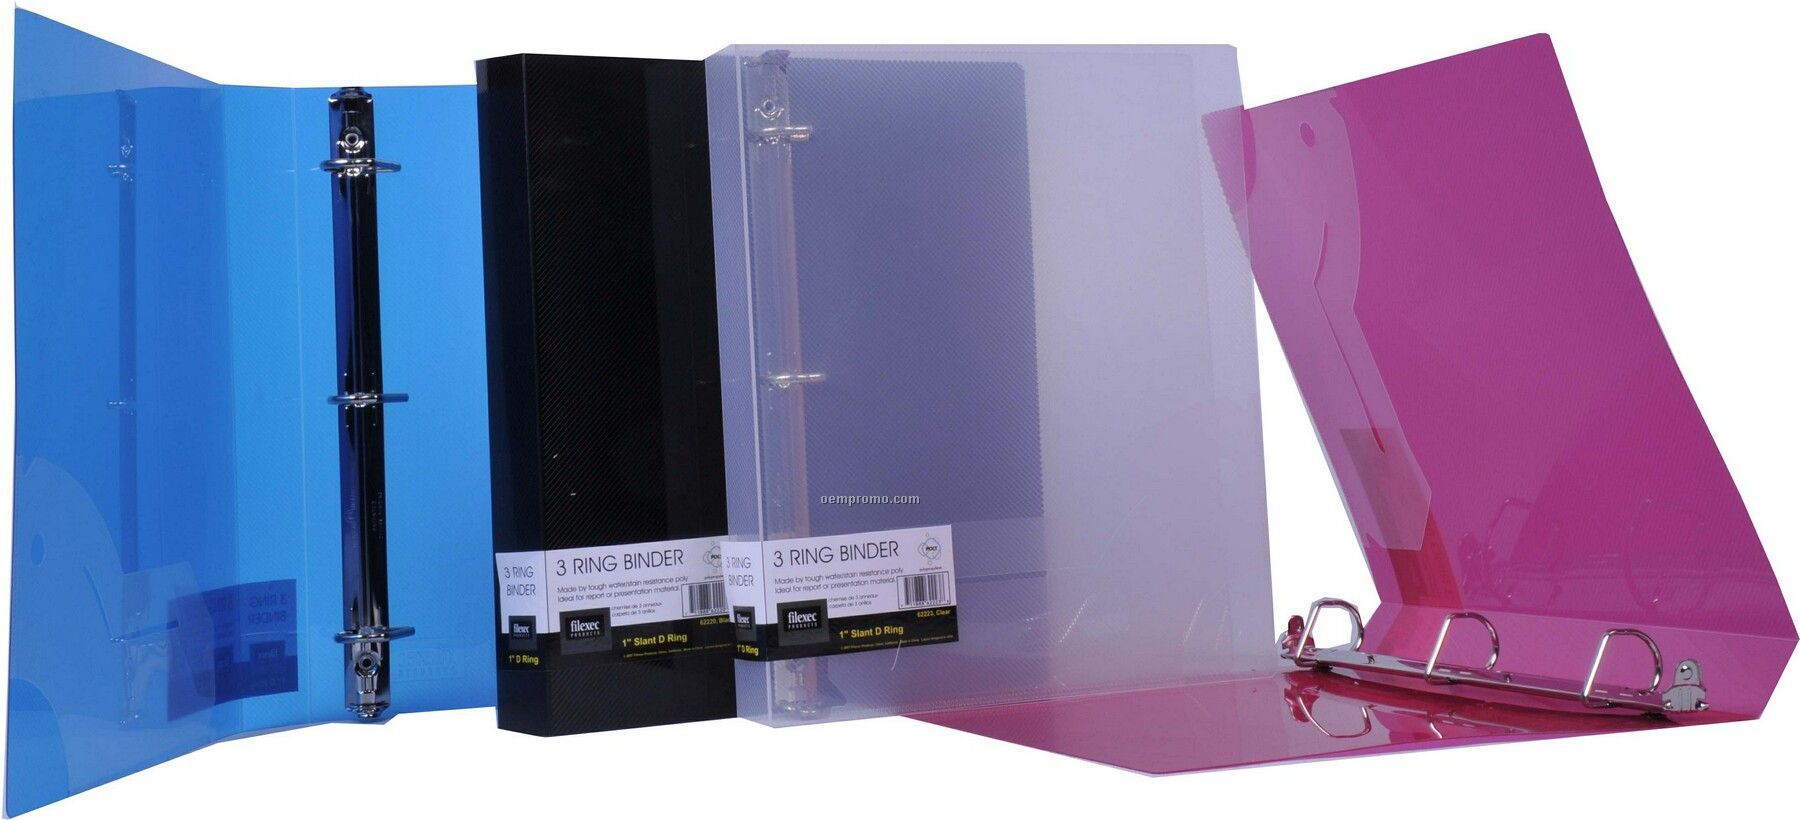 Translucent Red D-ring Binder With 1 1/2" Ring